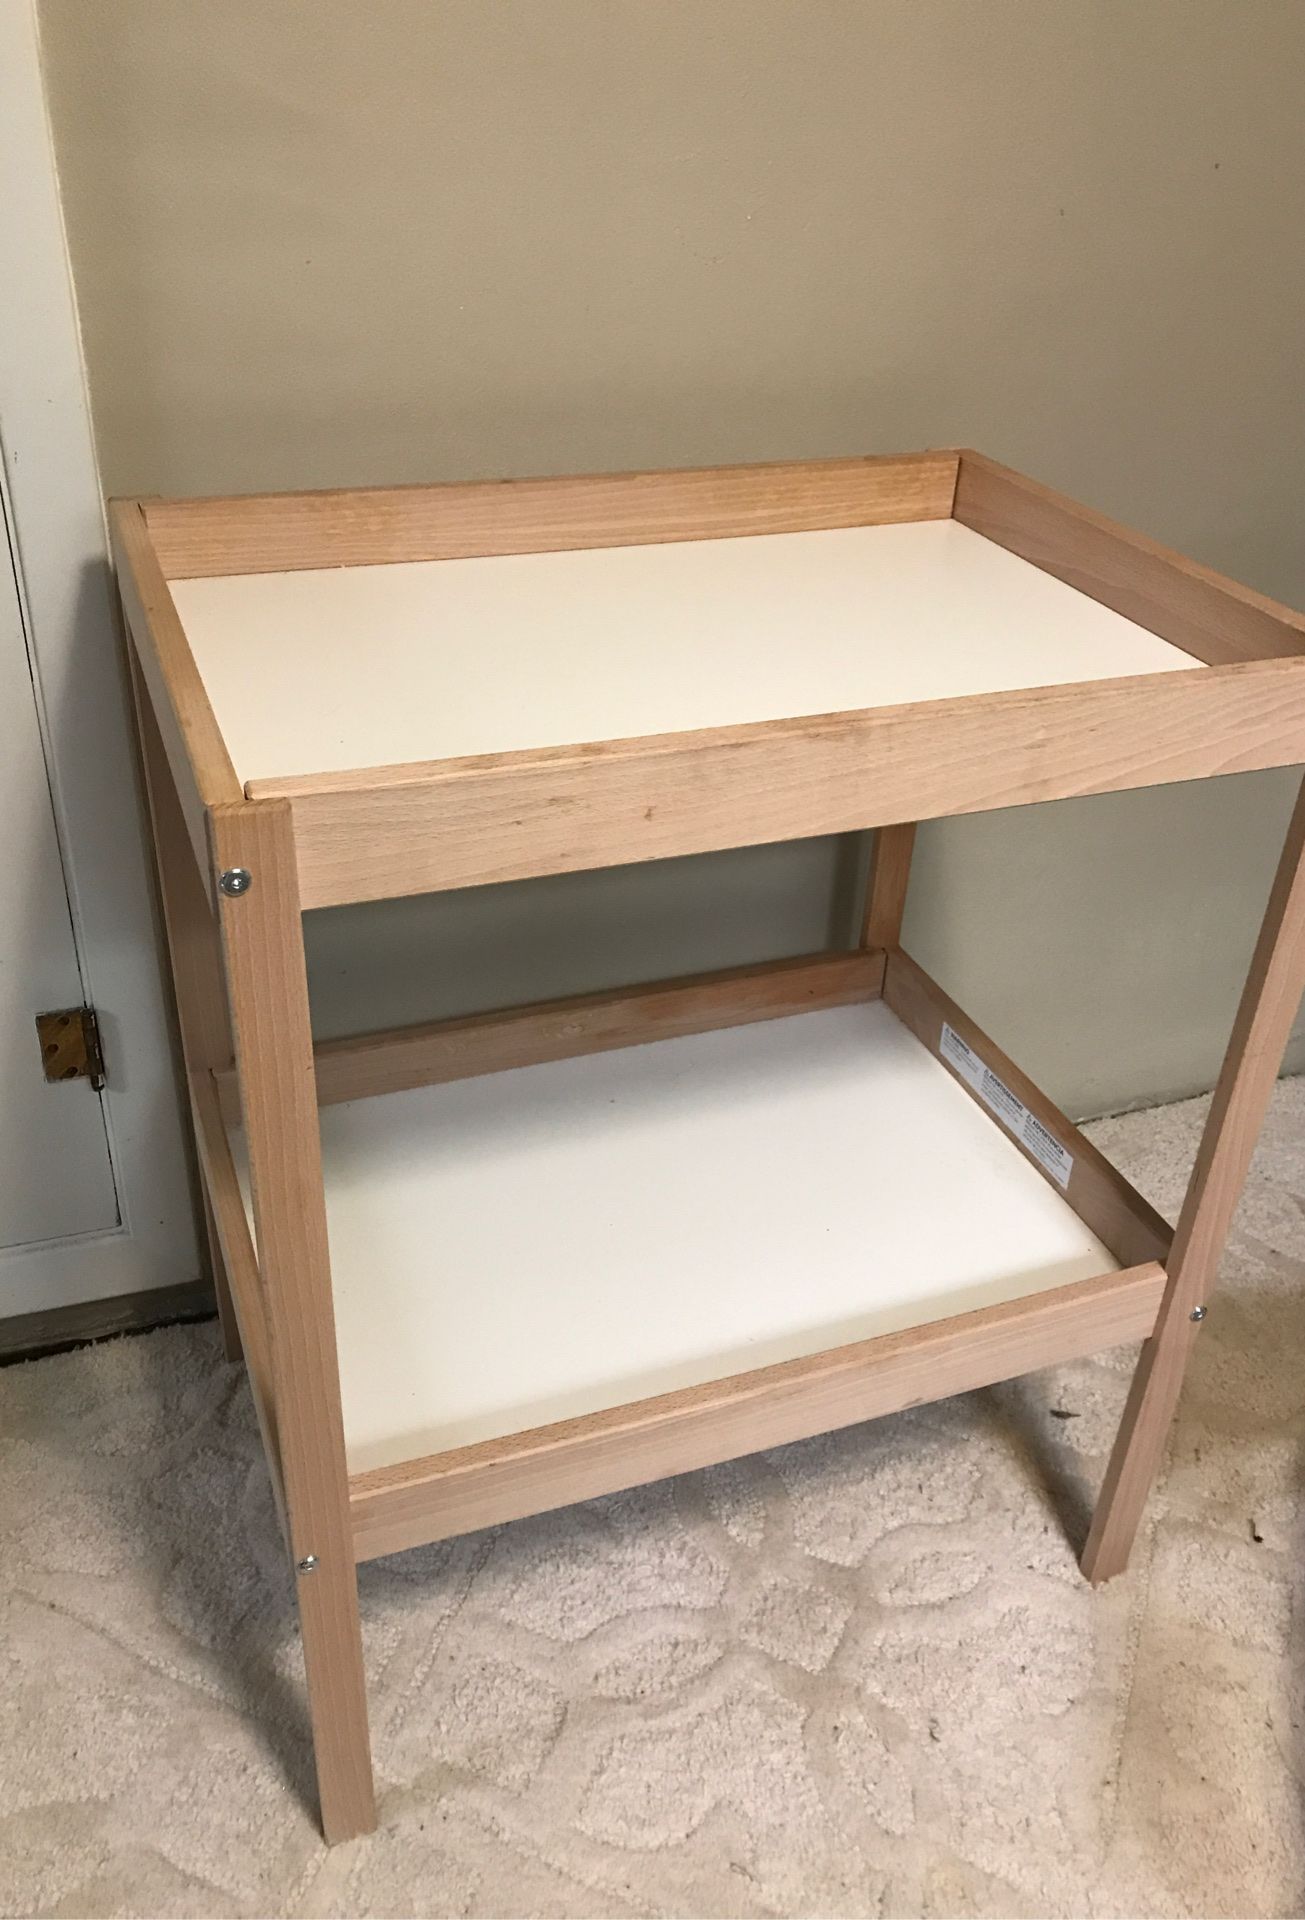 IKEA Infant Changing Table